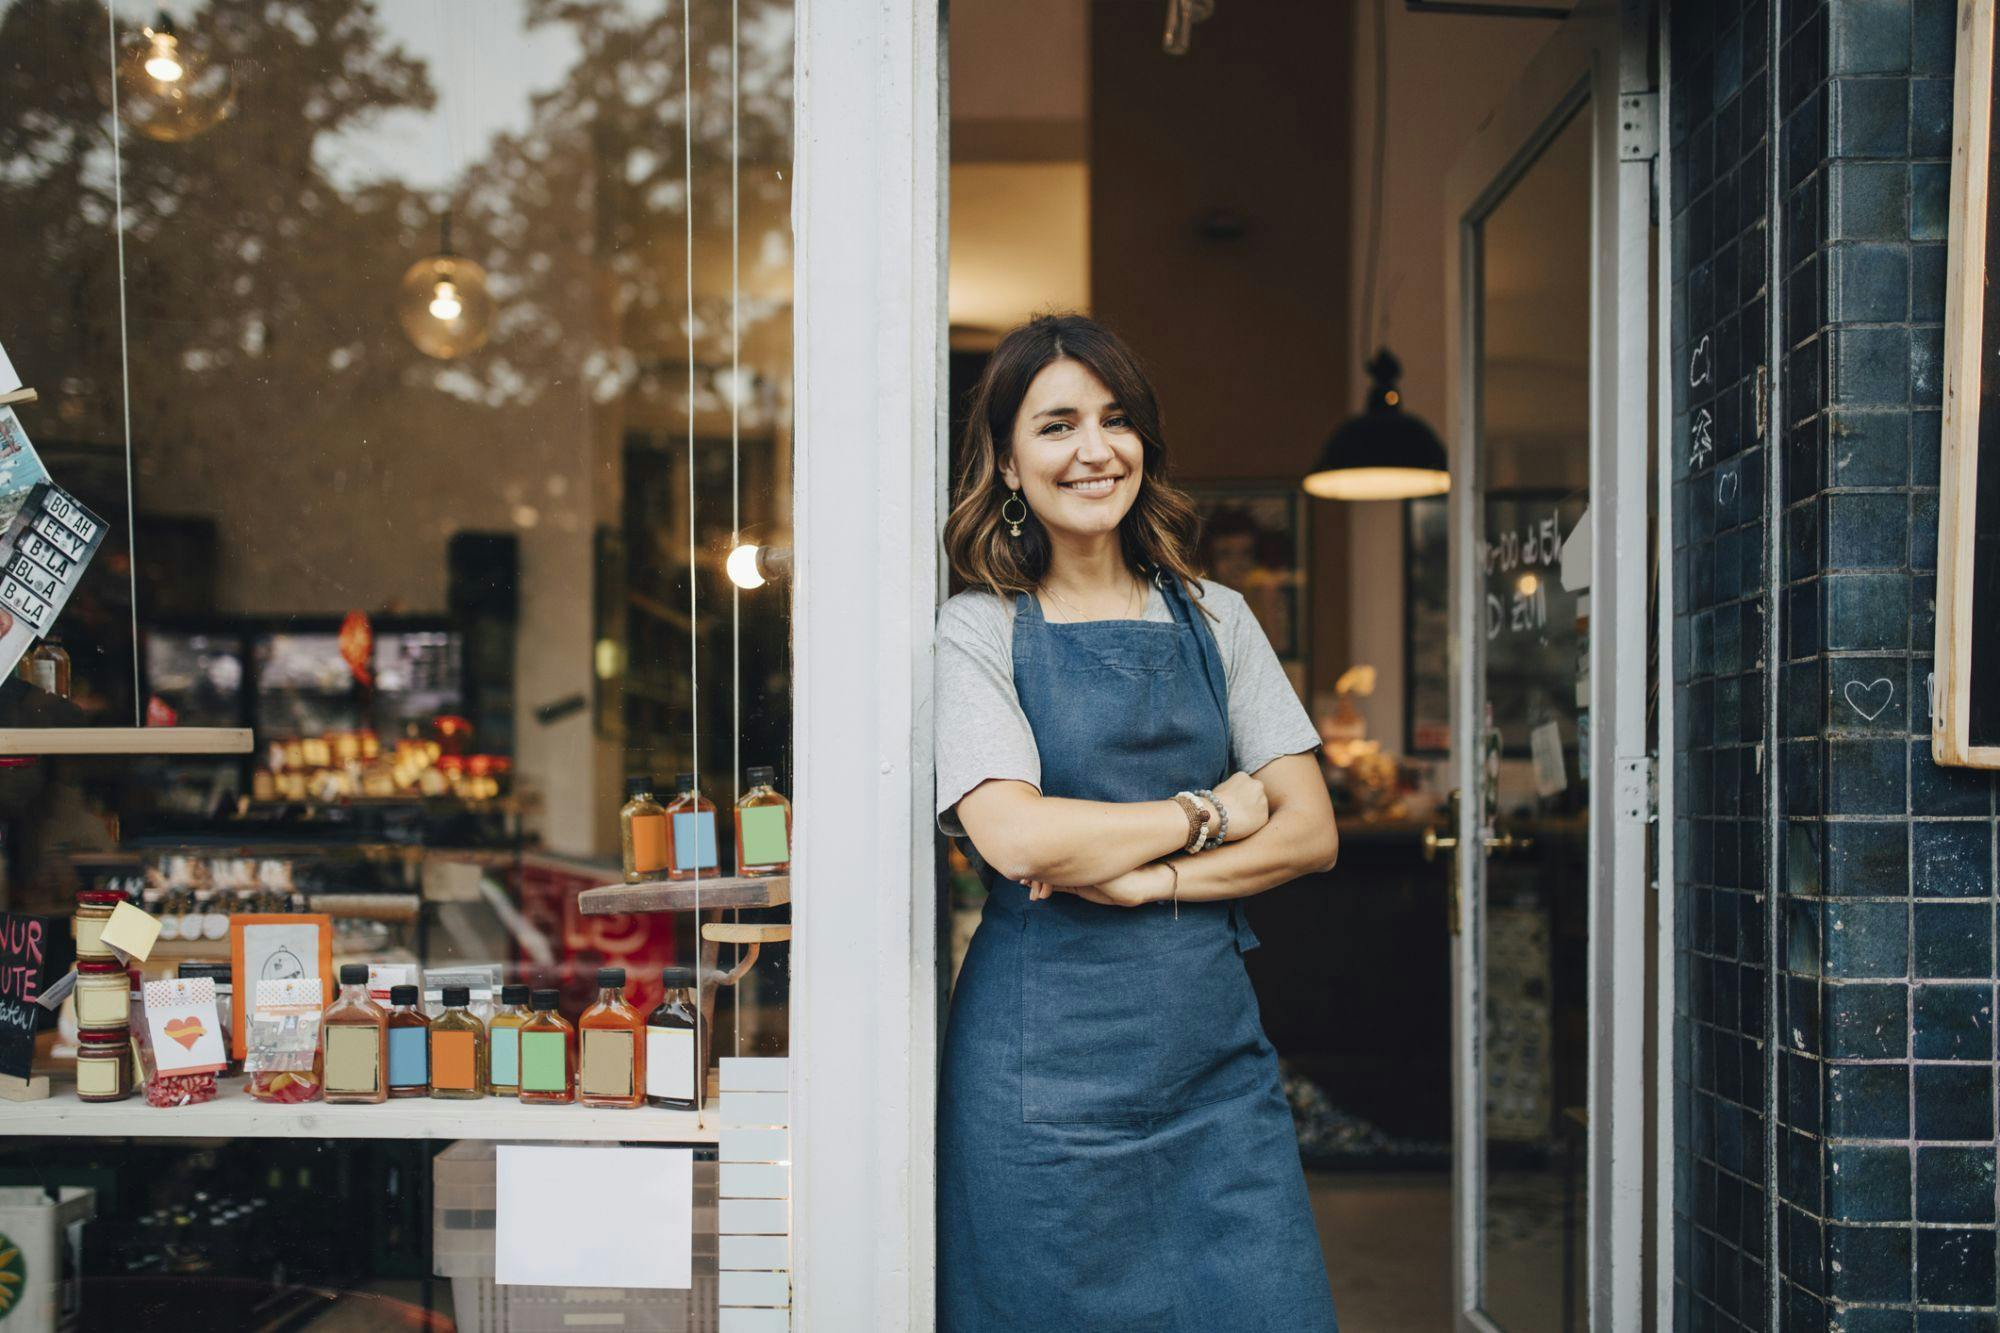 Business woman leaning on the side of her business door